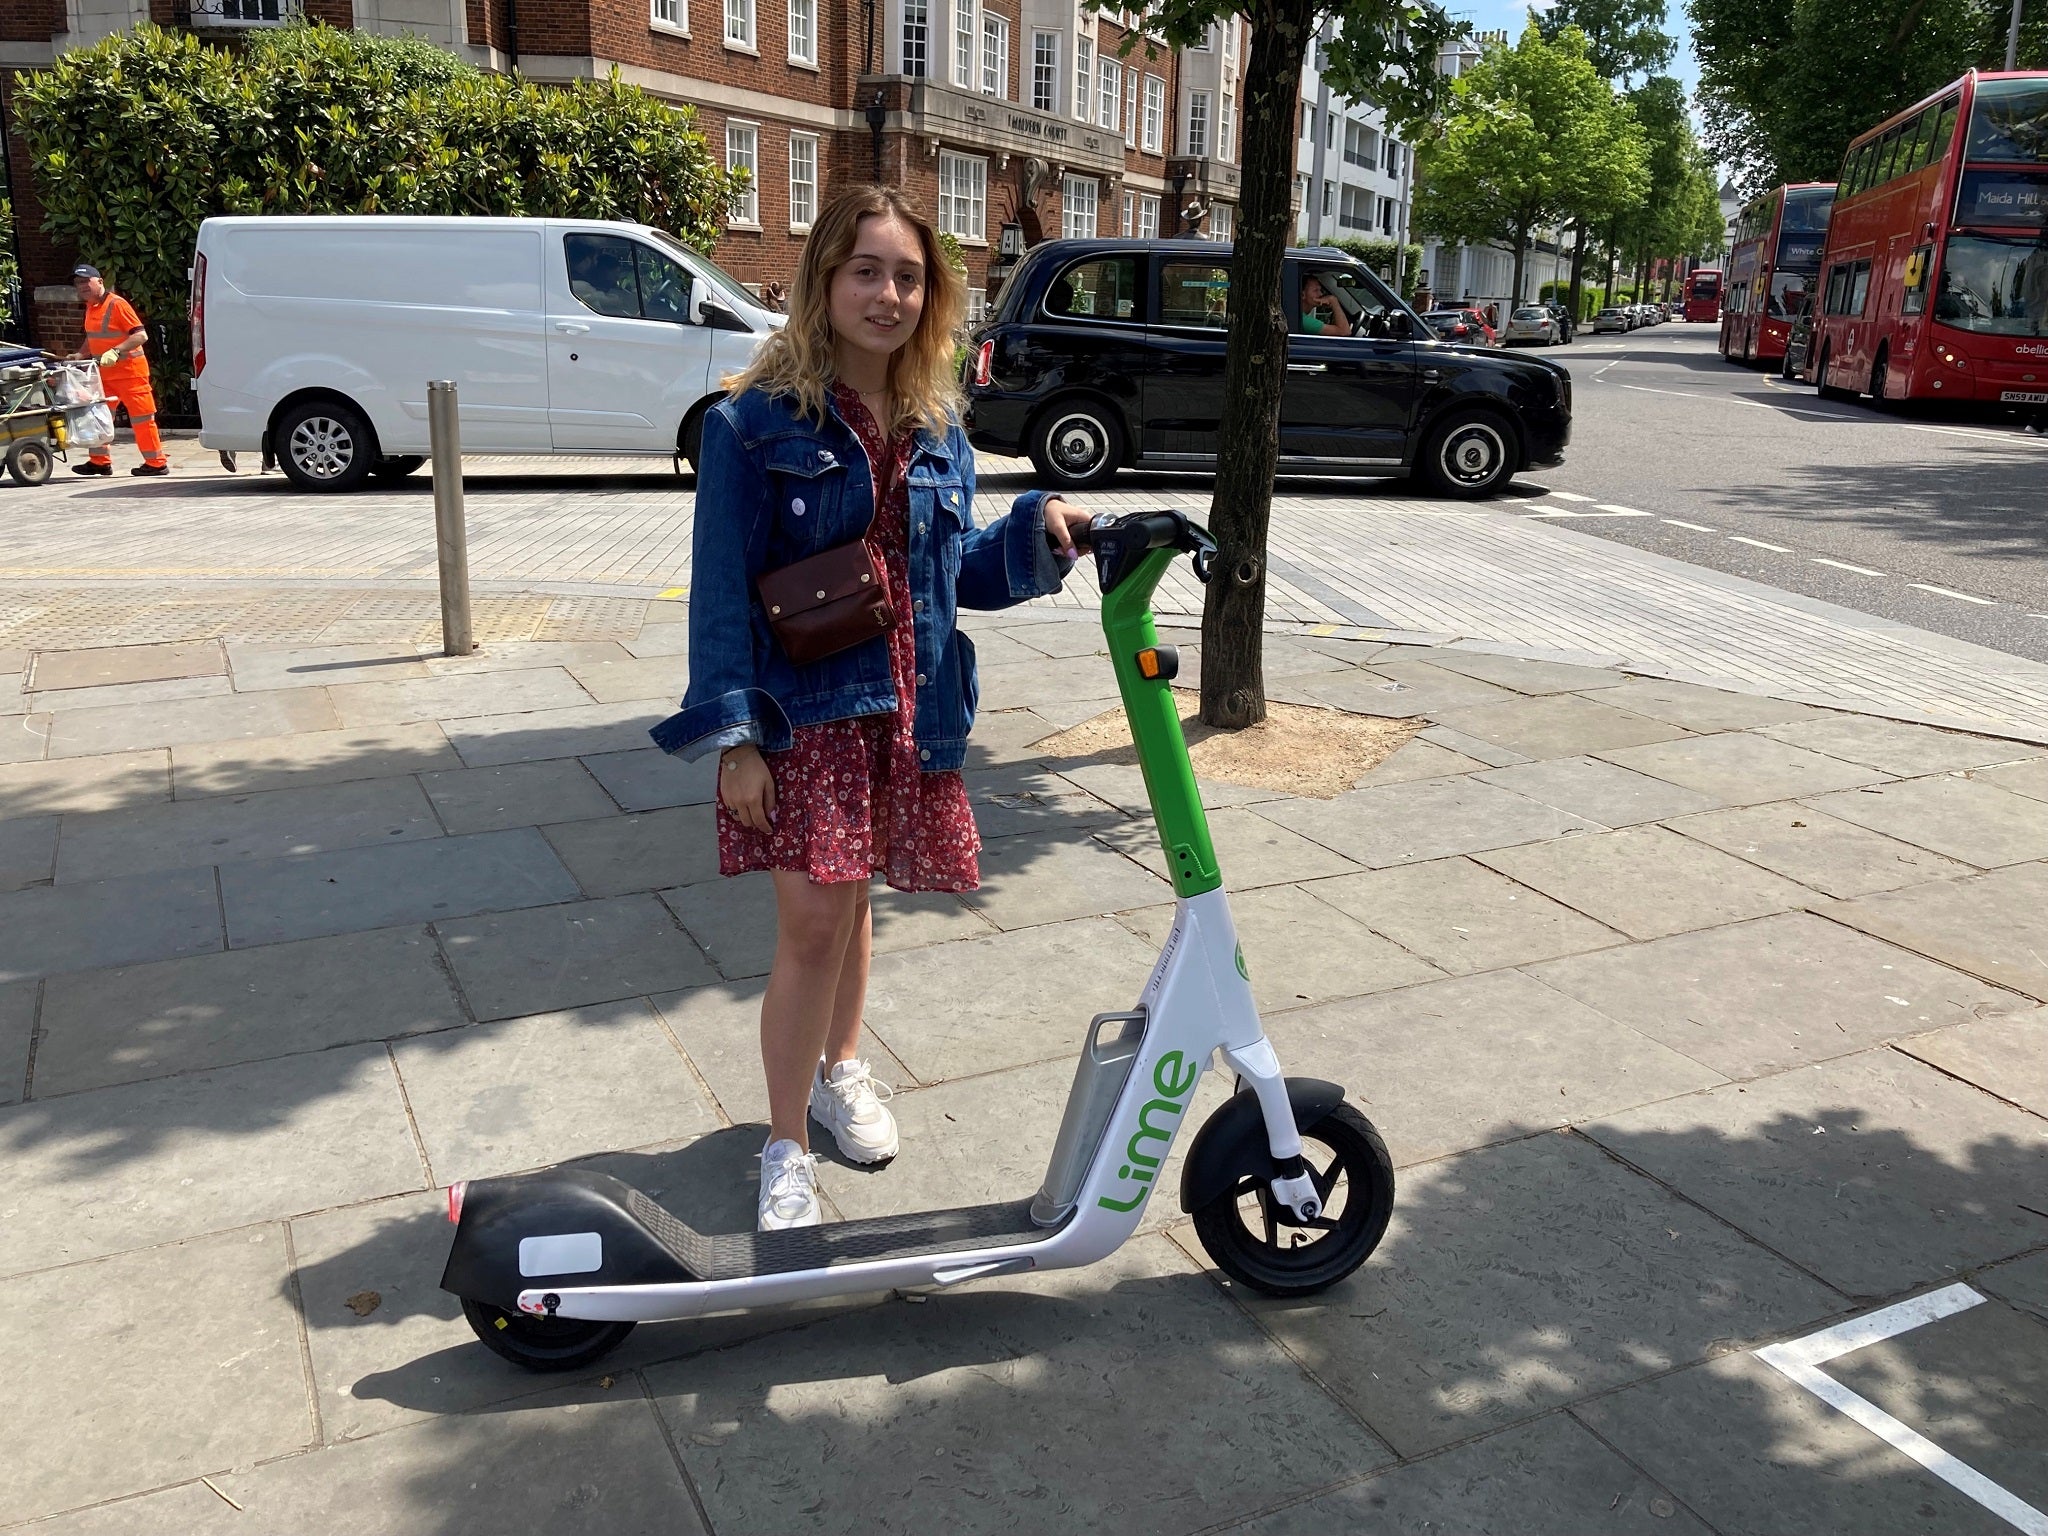 Good way to get around': E-scooter gets a very cautious welcome | Independent